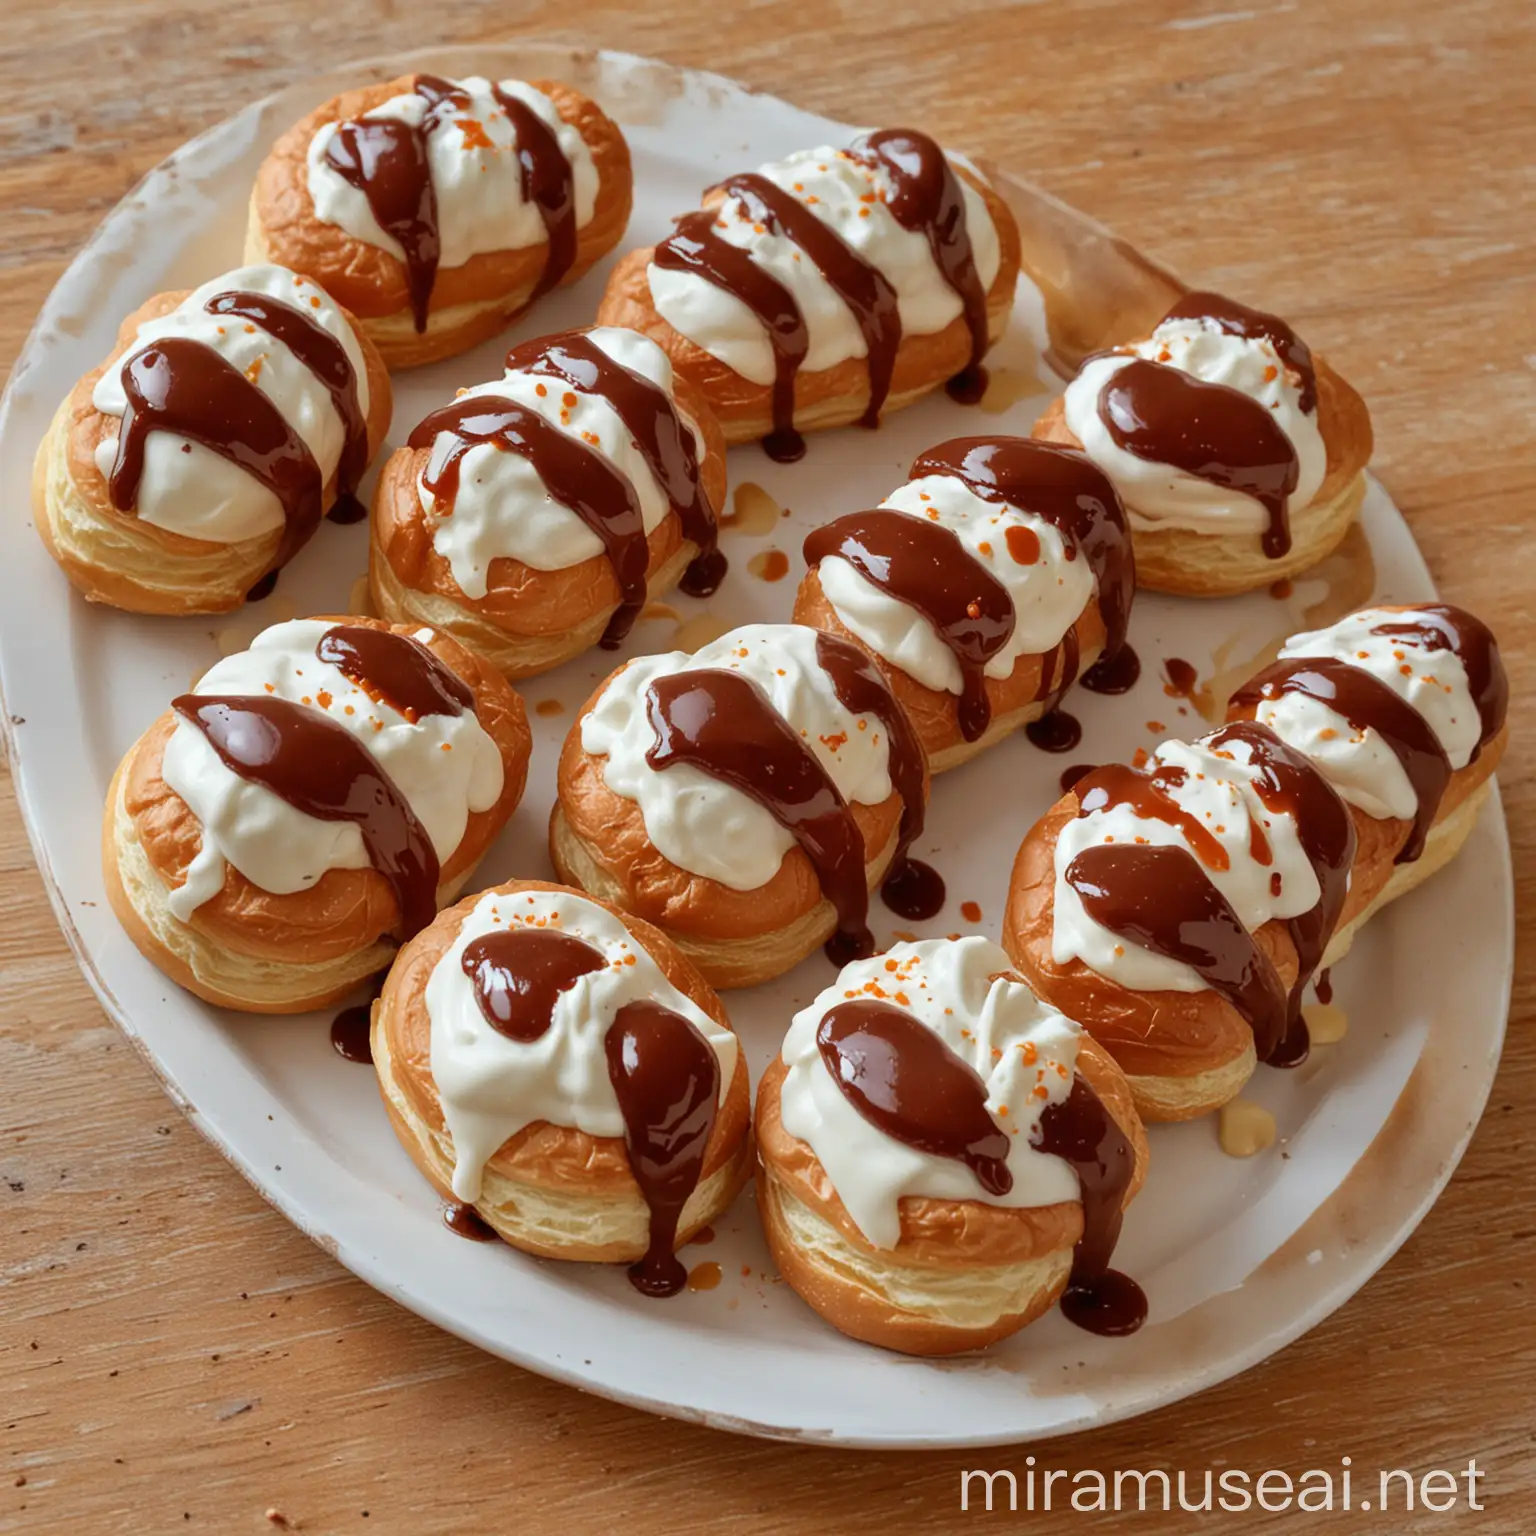 round chocolate éclair filled with bechamel sauce and dipped in barbecuesauce